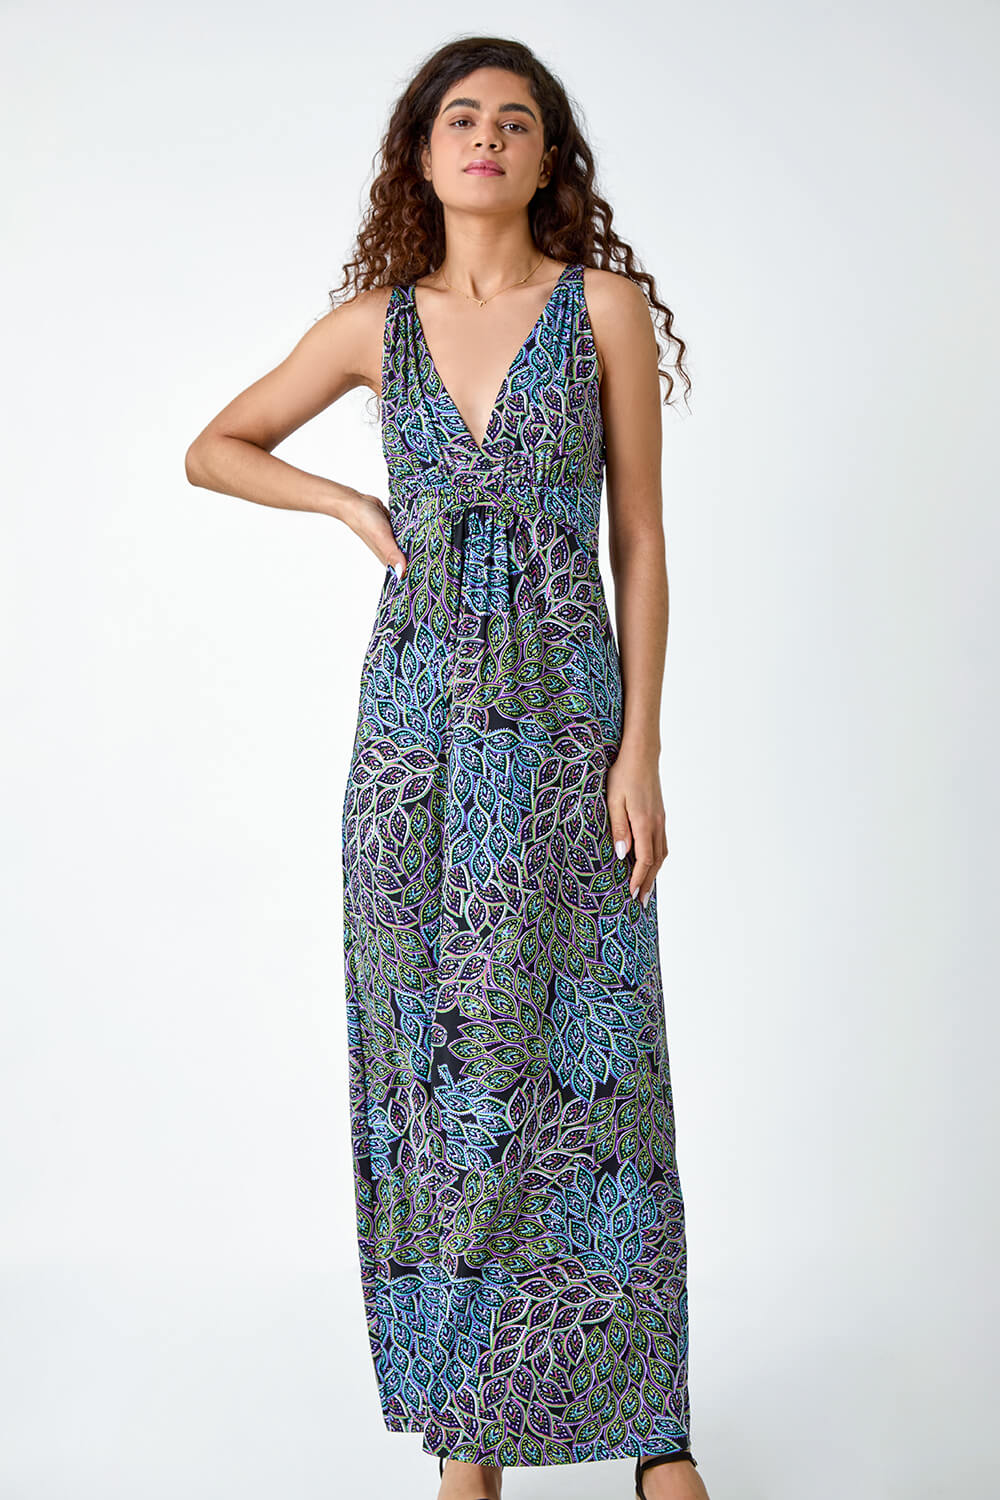 Black Abstract Animal Print Stretch Maxi Dress, Image 2 of 5